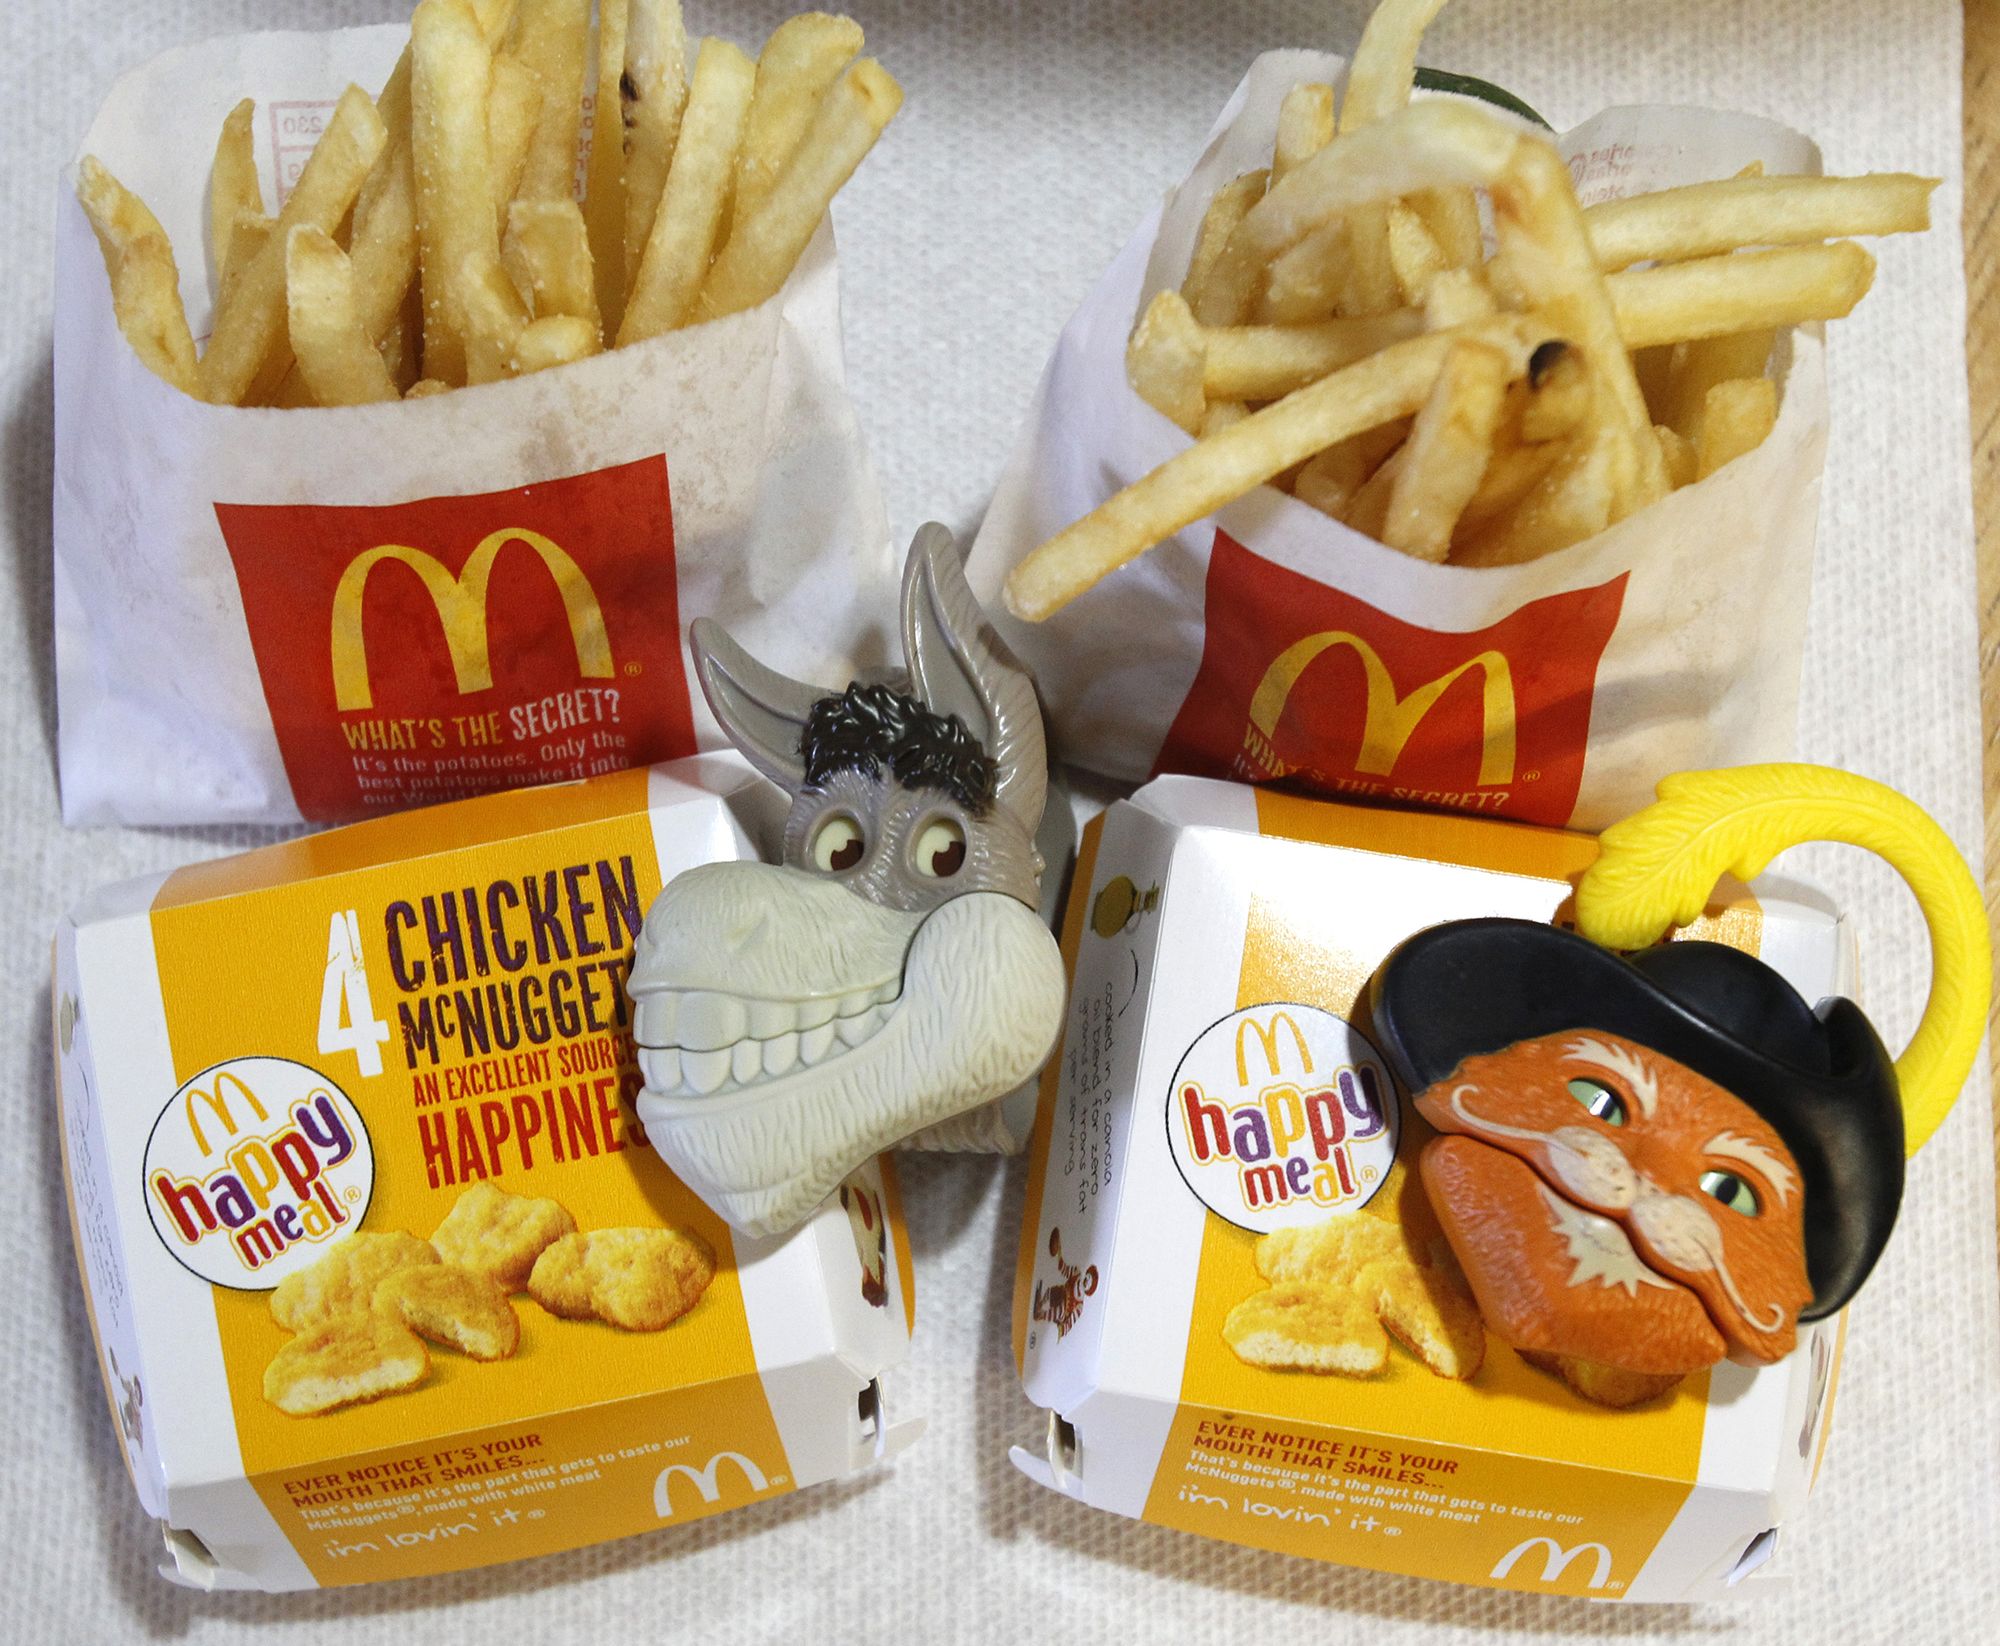 5 things you probably didn't know about McDonald's Happy Meals